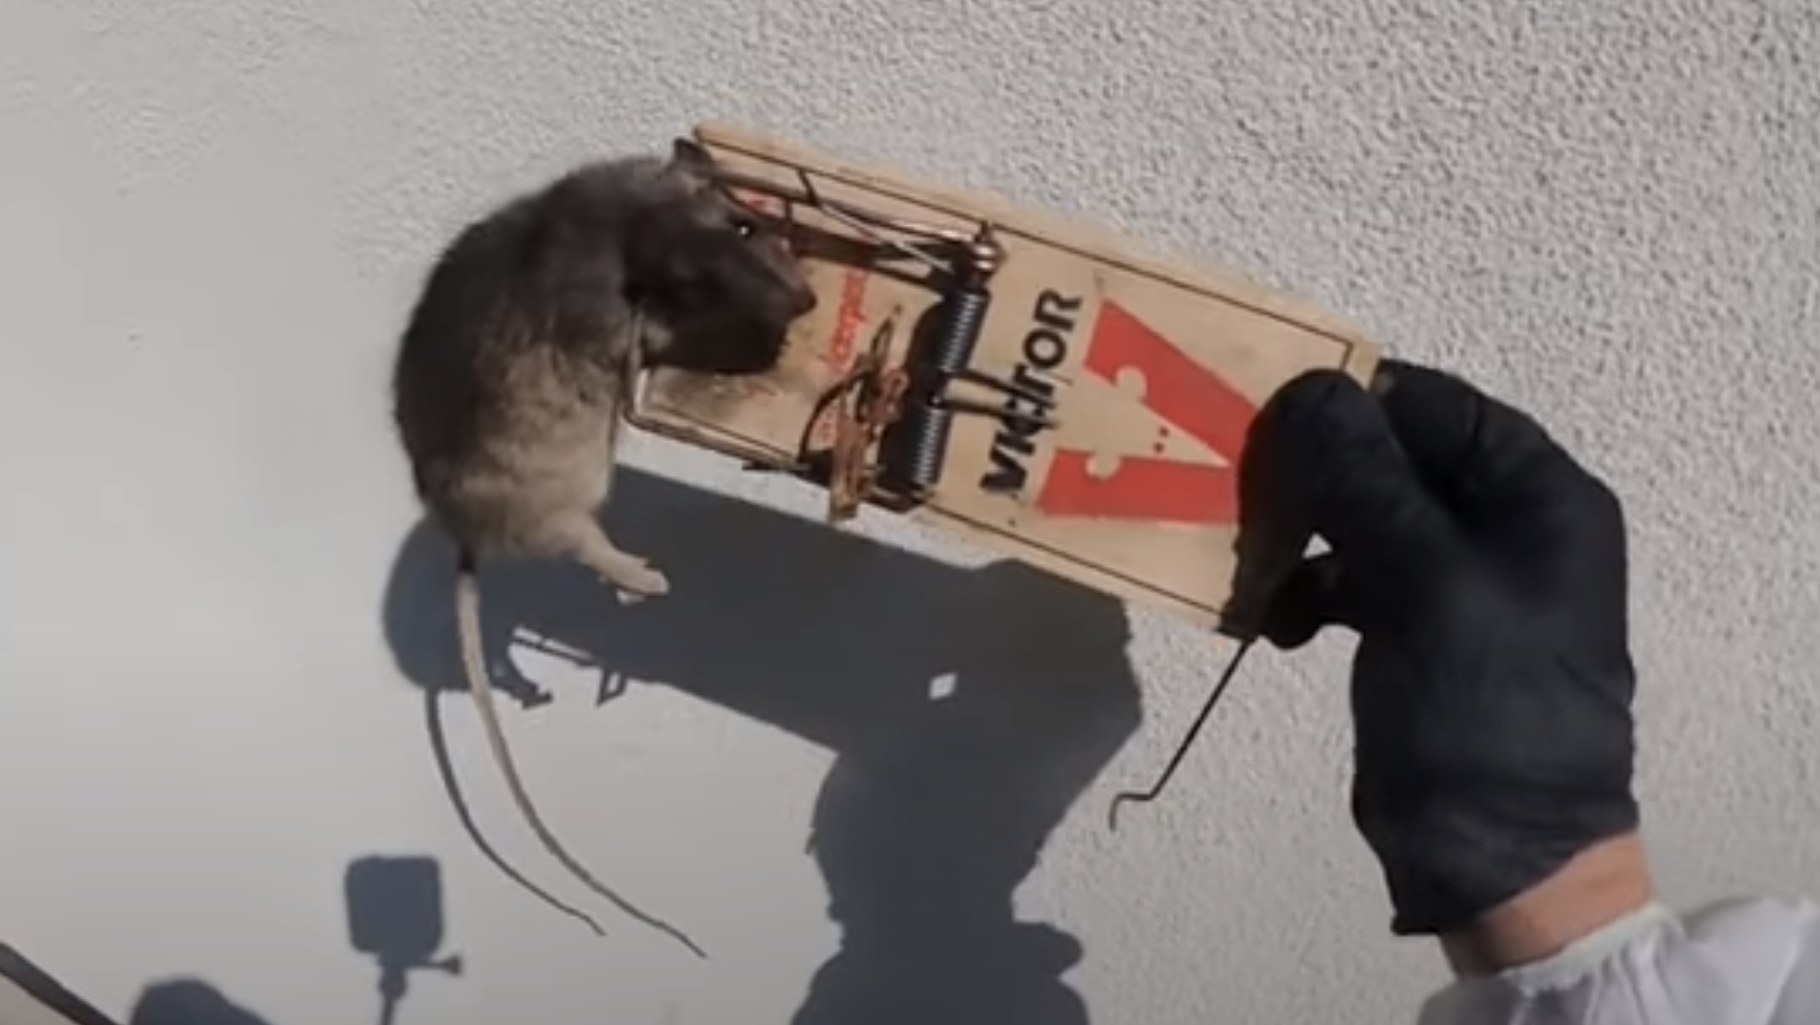 How to Catch & Trap Rats like a Pro: 7 Easy Steps